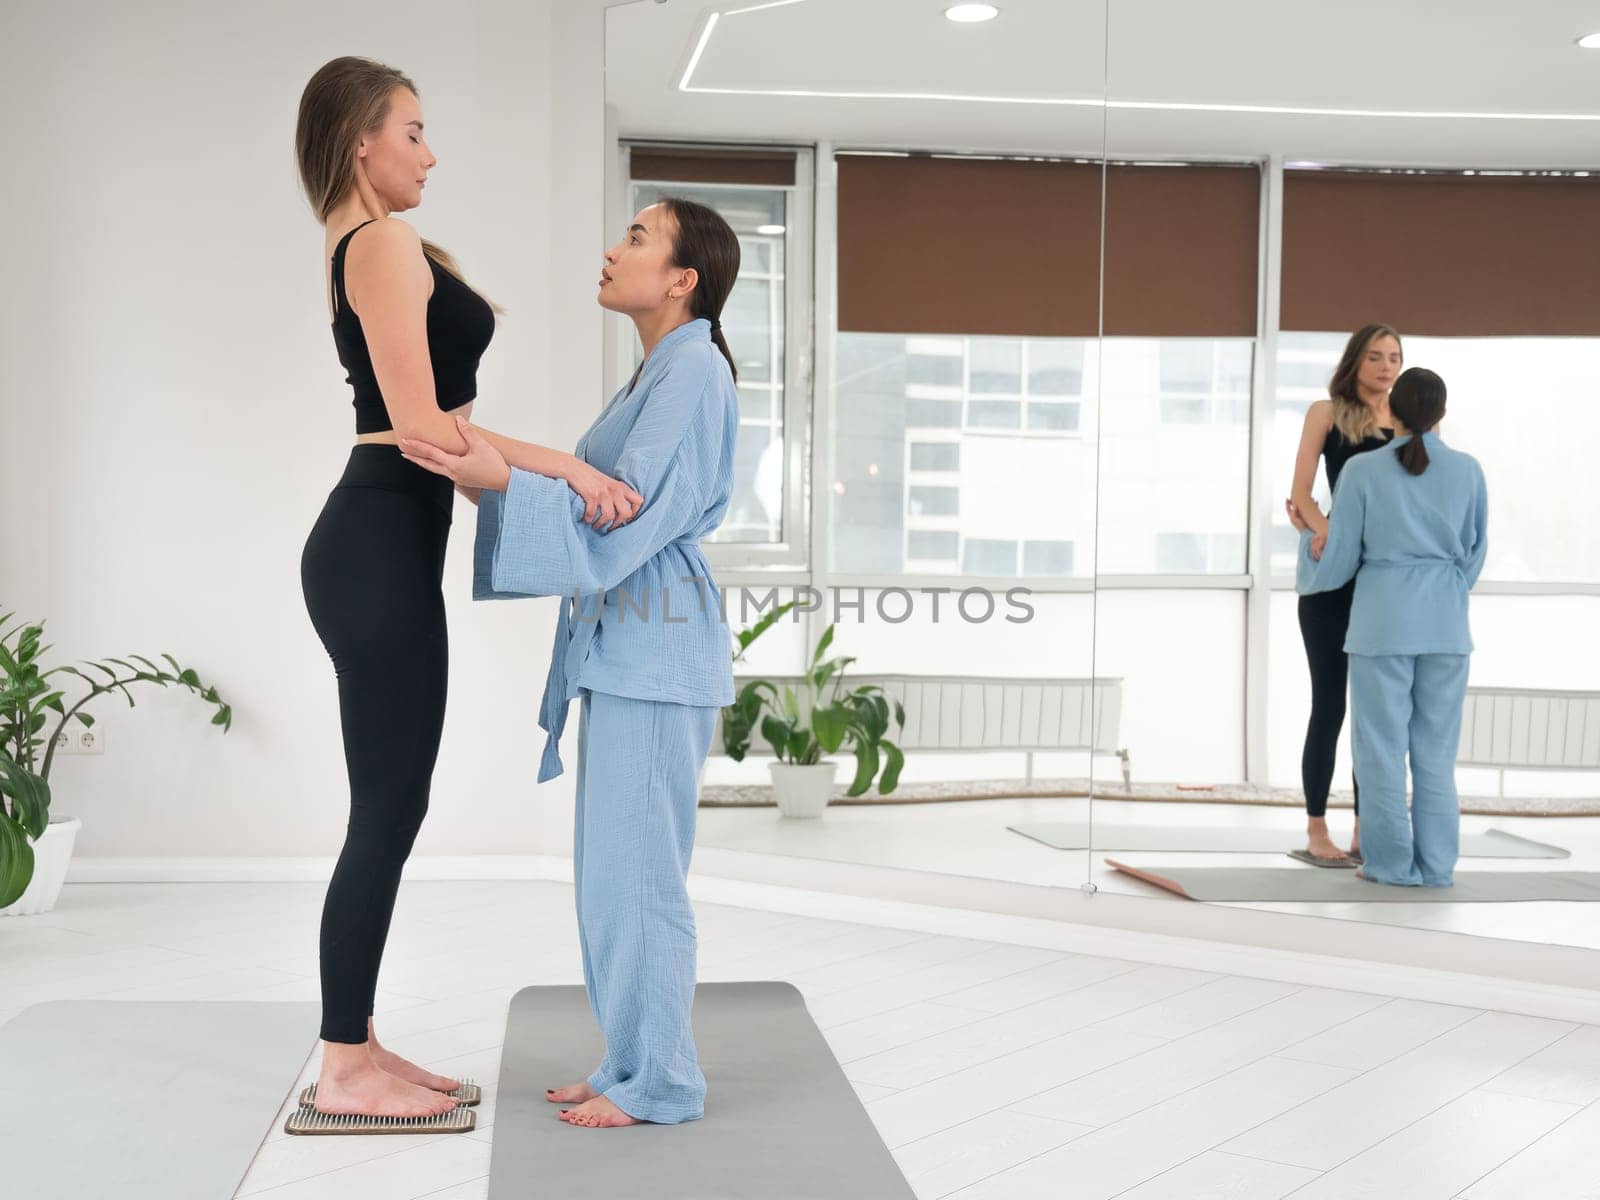 Caucasian woman stands on sadhu boards with therapist support. by mrwed54